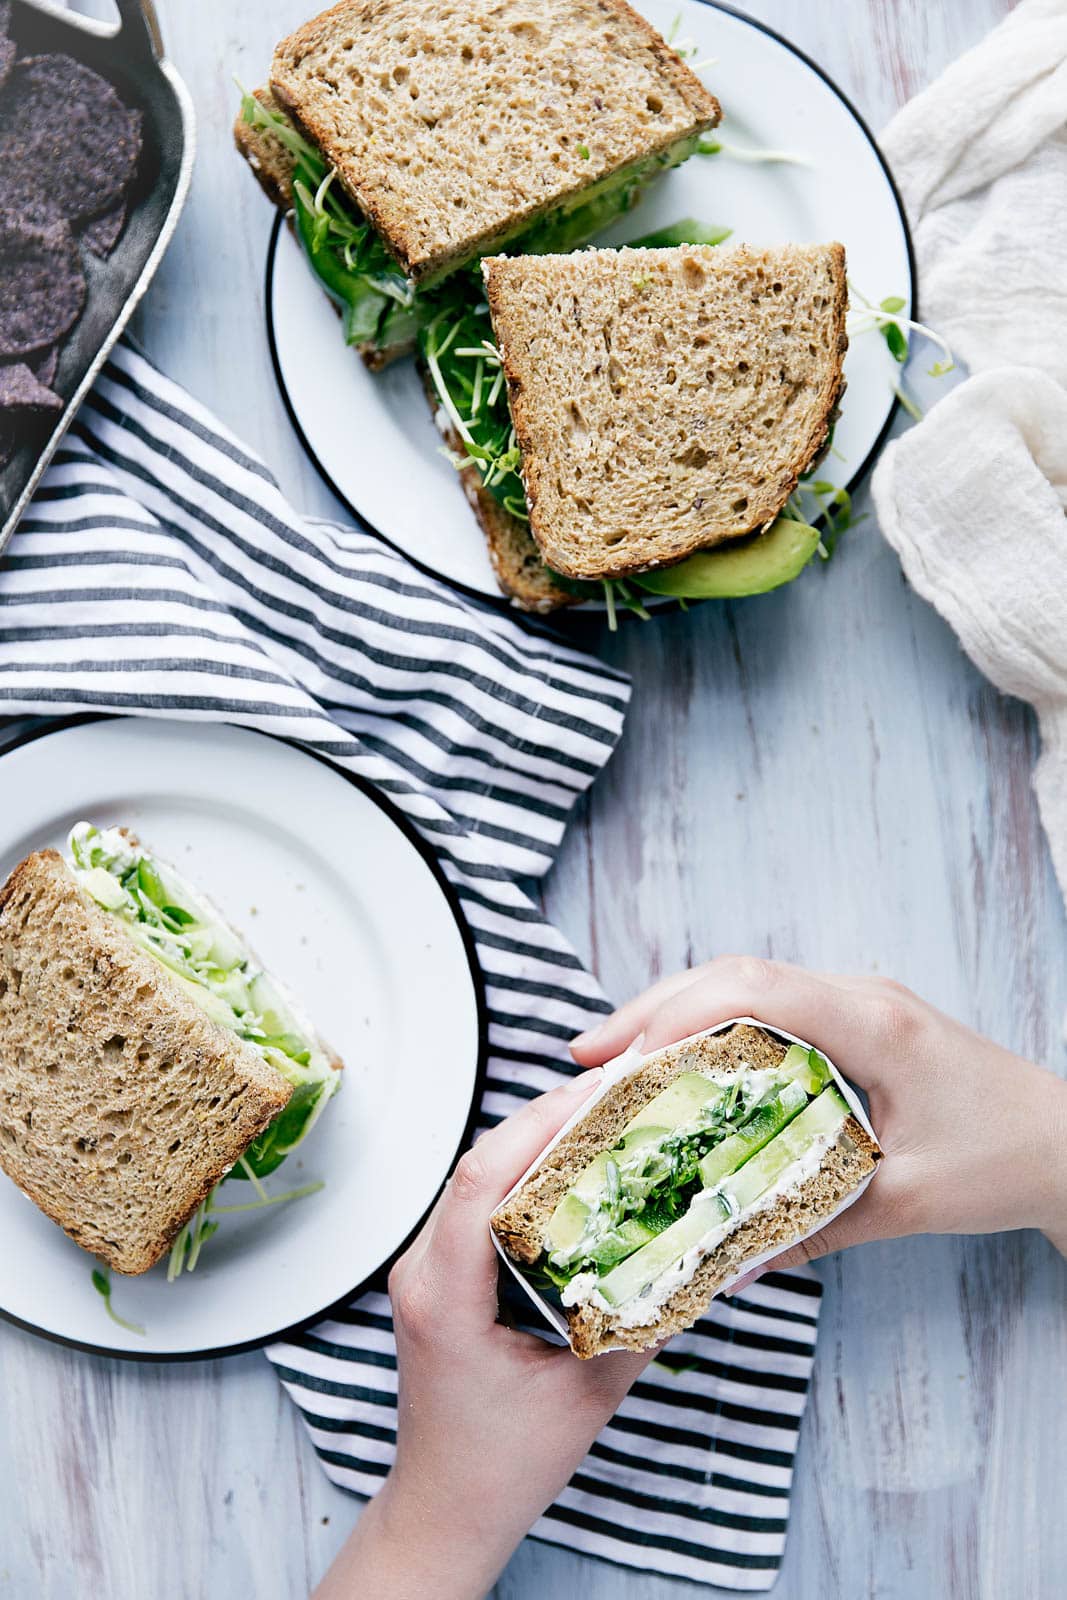 A green sandwich bursting at the seams with herbed goat cheese, avocado, alfalfa, and more.